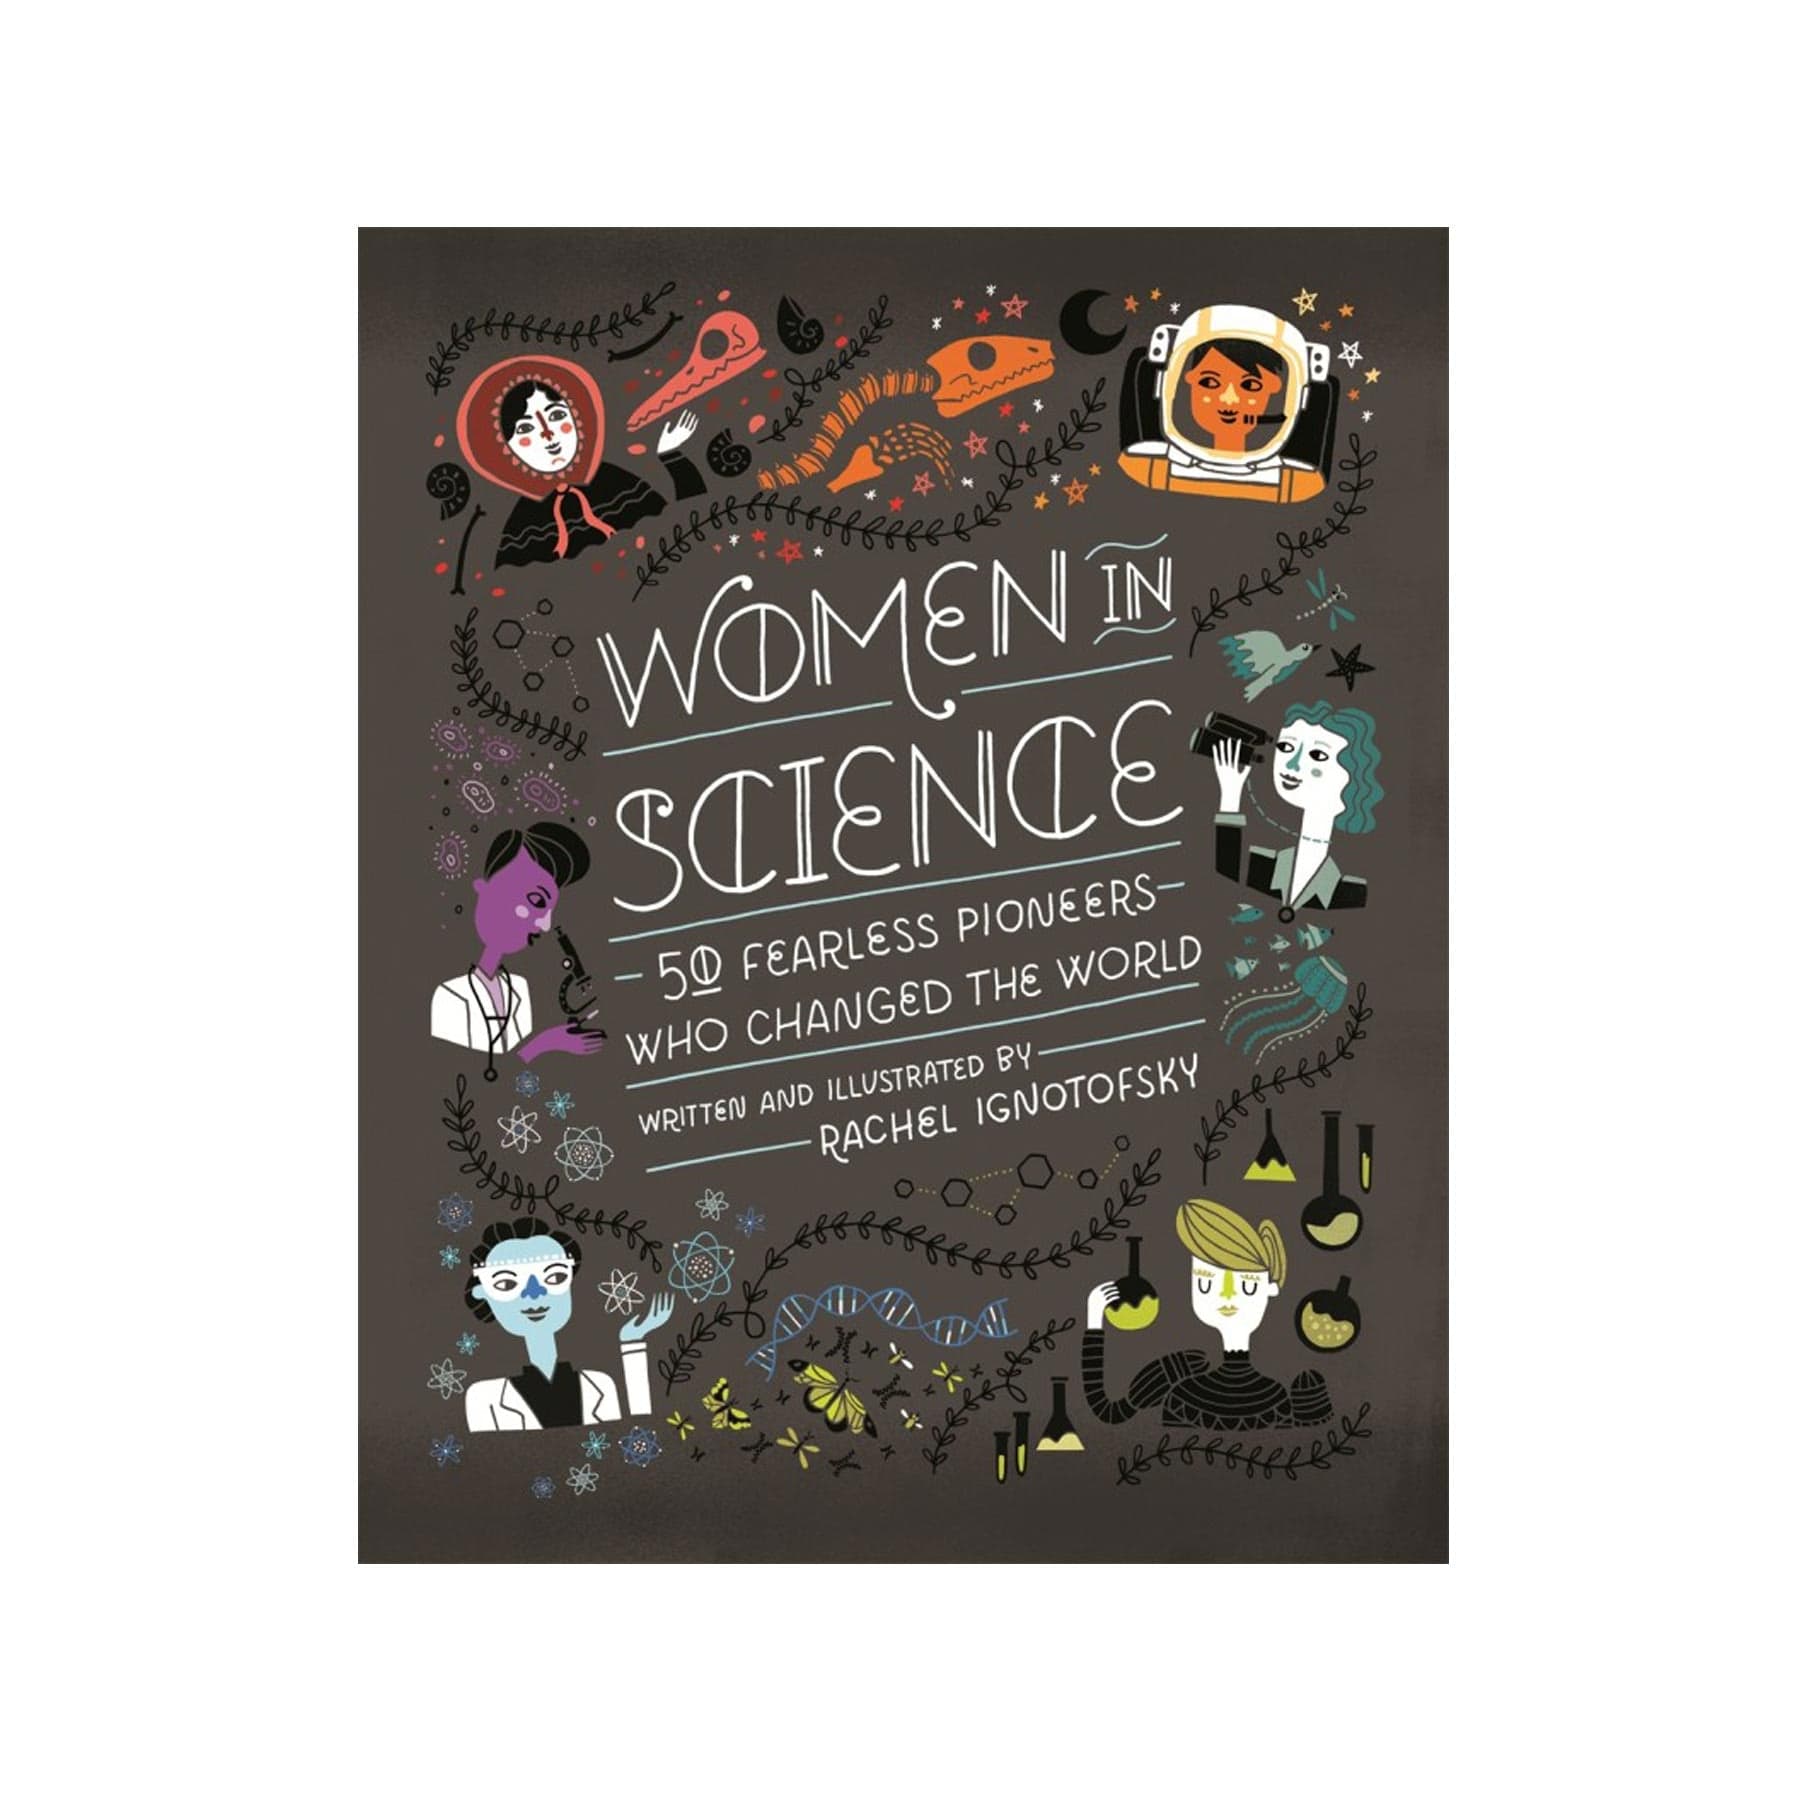 Women in science: 50 fearless pioneers who changed the world